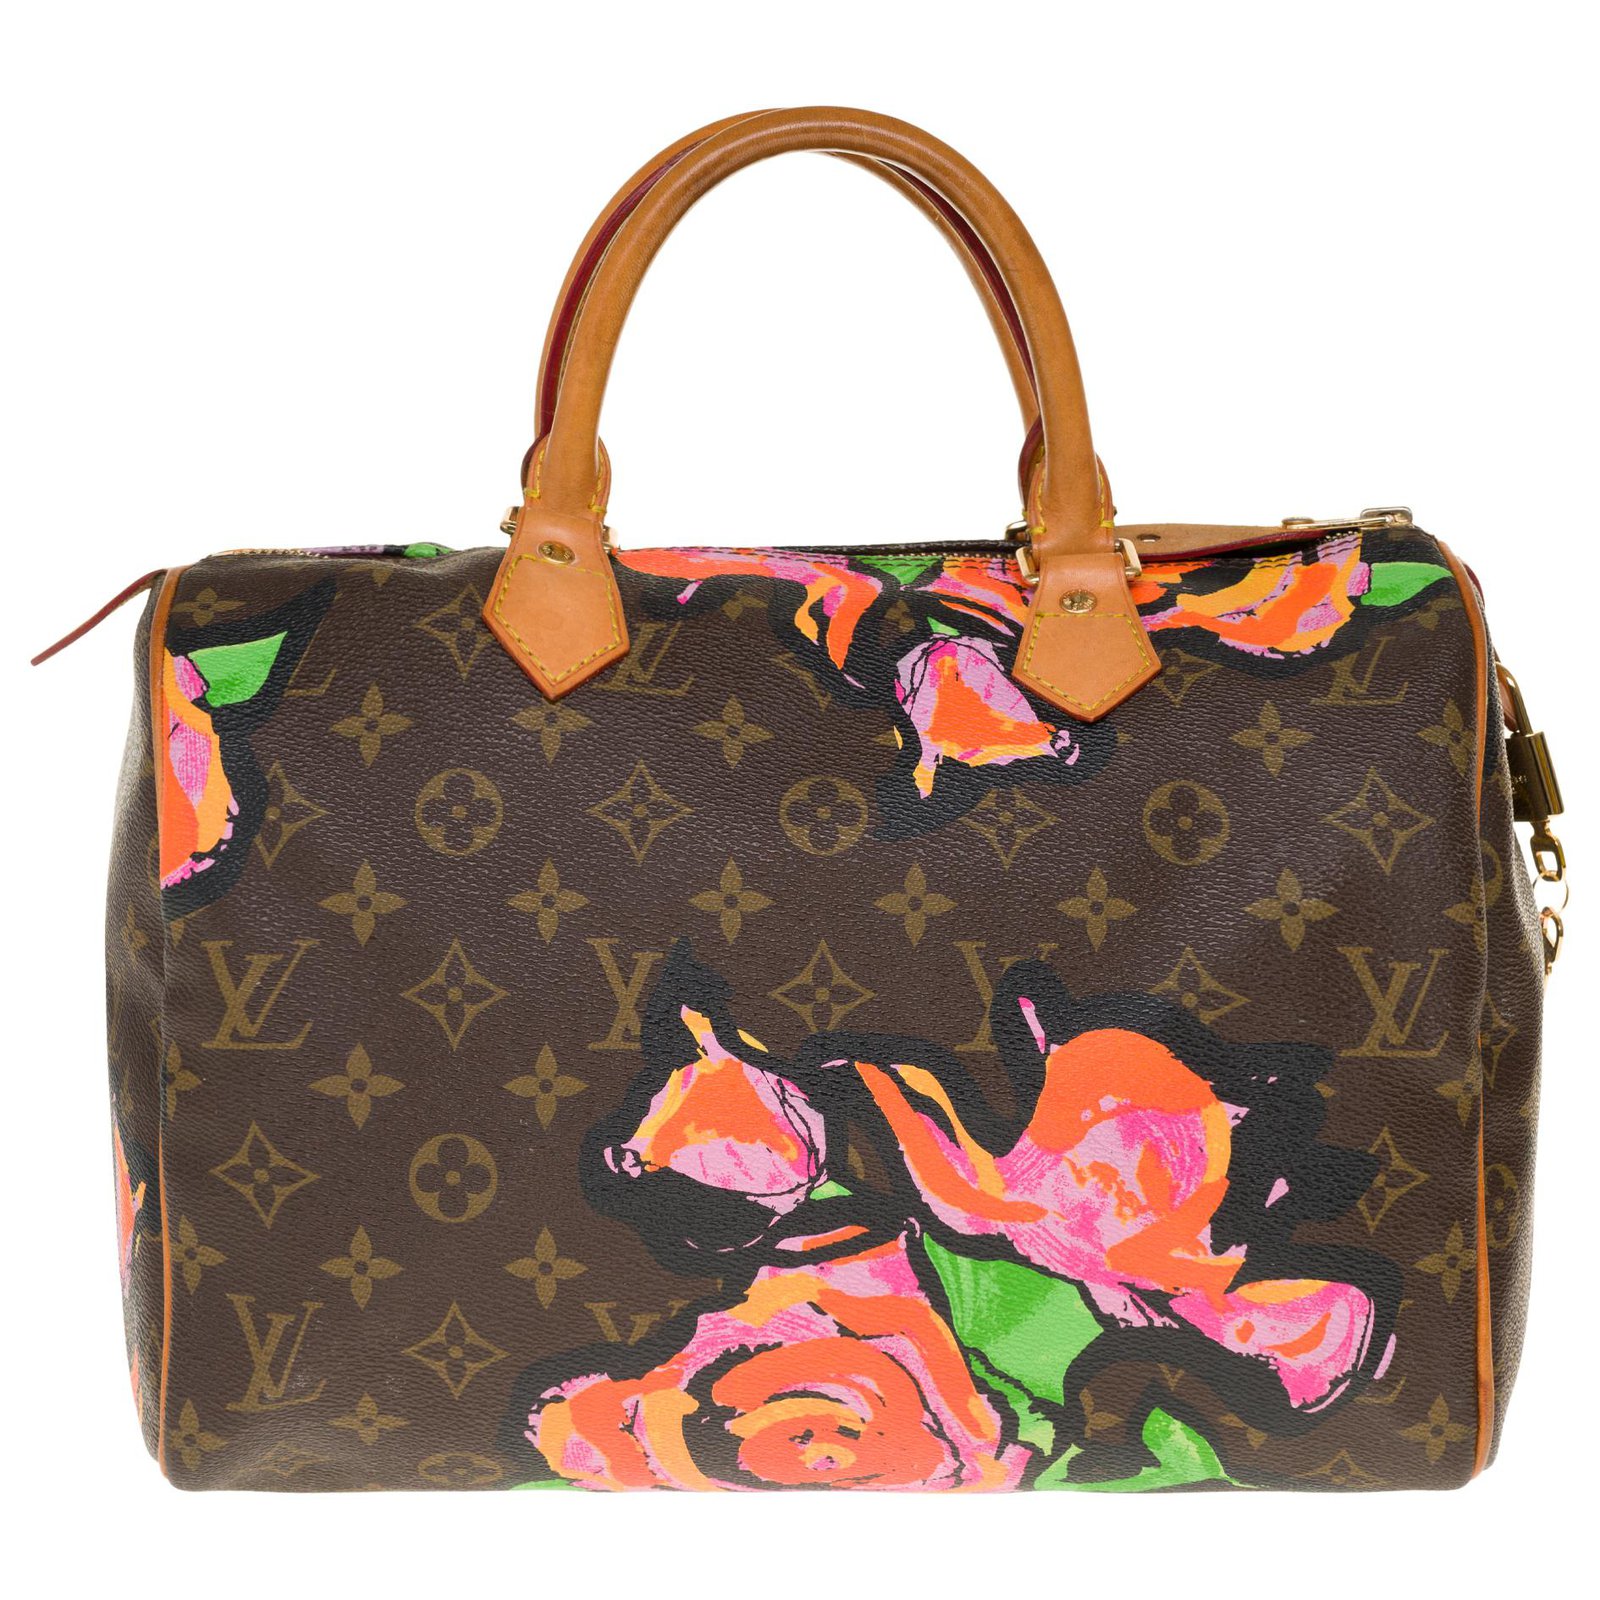 Louis Vuitton Stephen Sprouse Roses Hand Bag, Speedy 30 Details